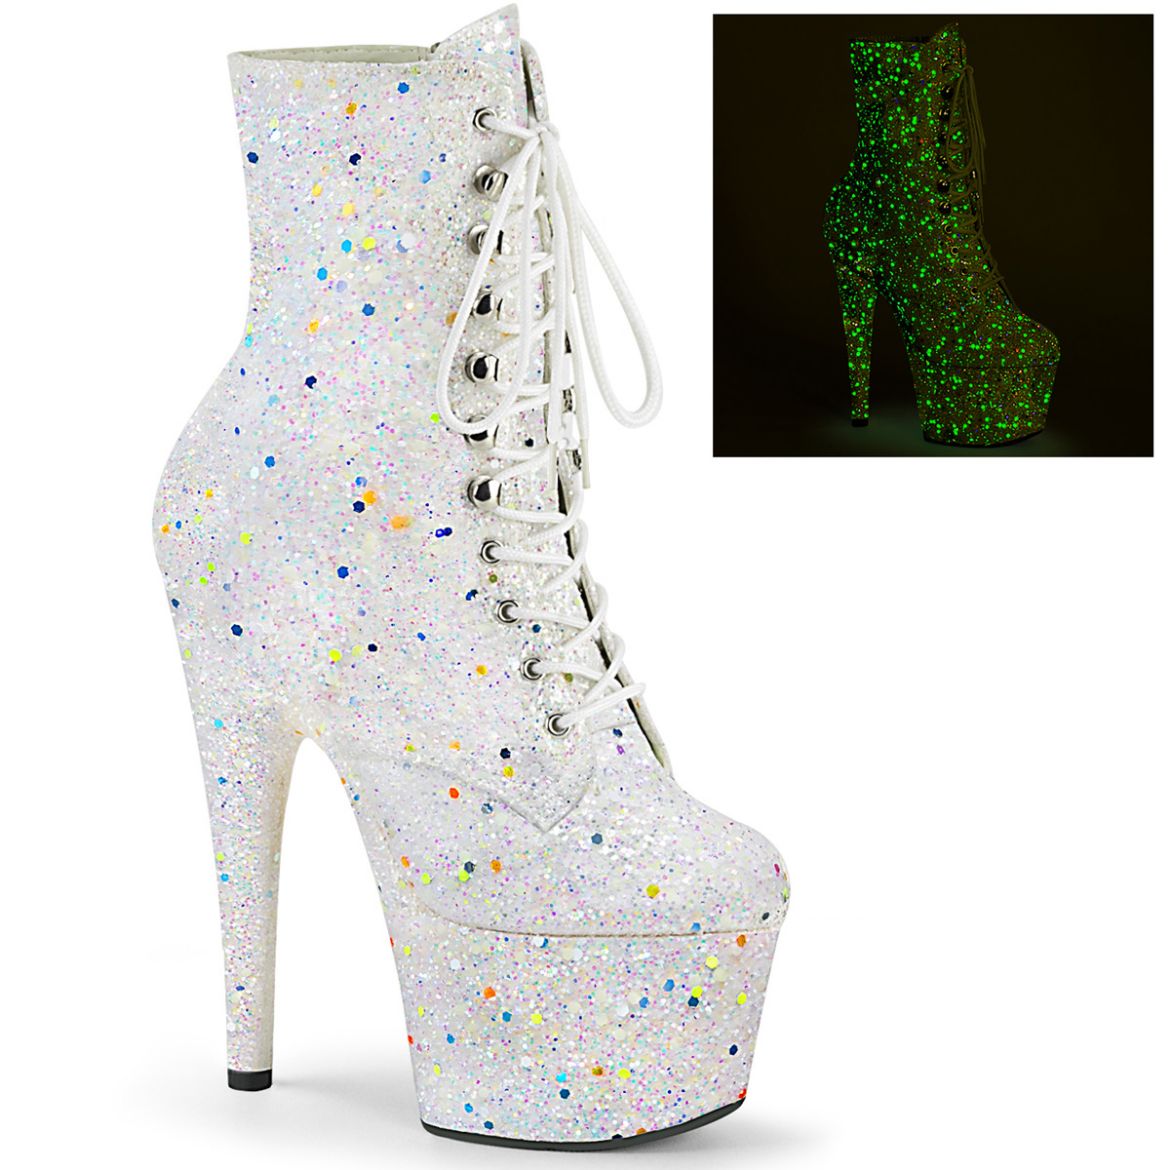 Product image of Pleaser ADORE-1020GDLG Whtie Multicolour Glitter/White Multicolour Glitter 7 inch (17.8 cm) Heel 2 3/4 inch (7 cm) Platform Lace-Up Front Ankle Boot Side Zip